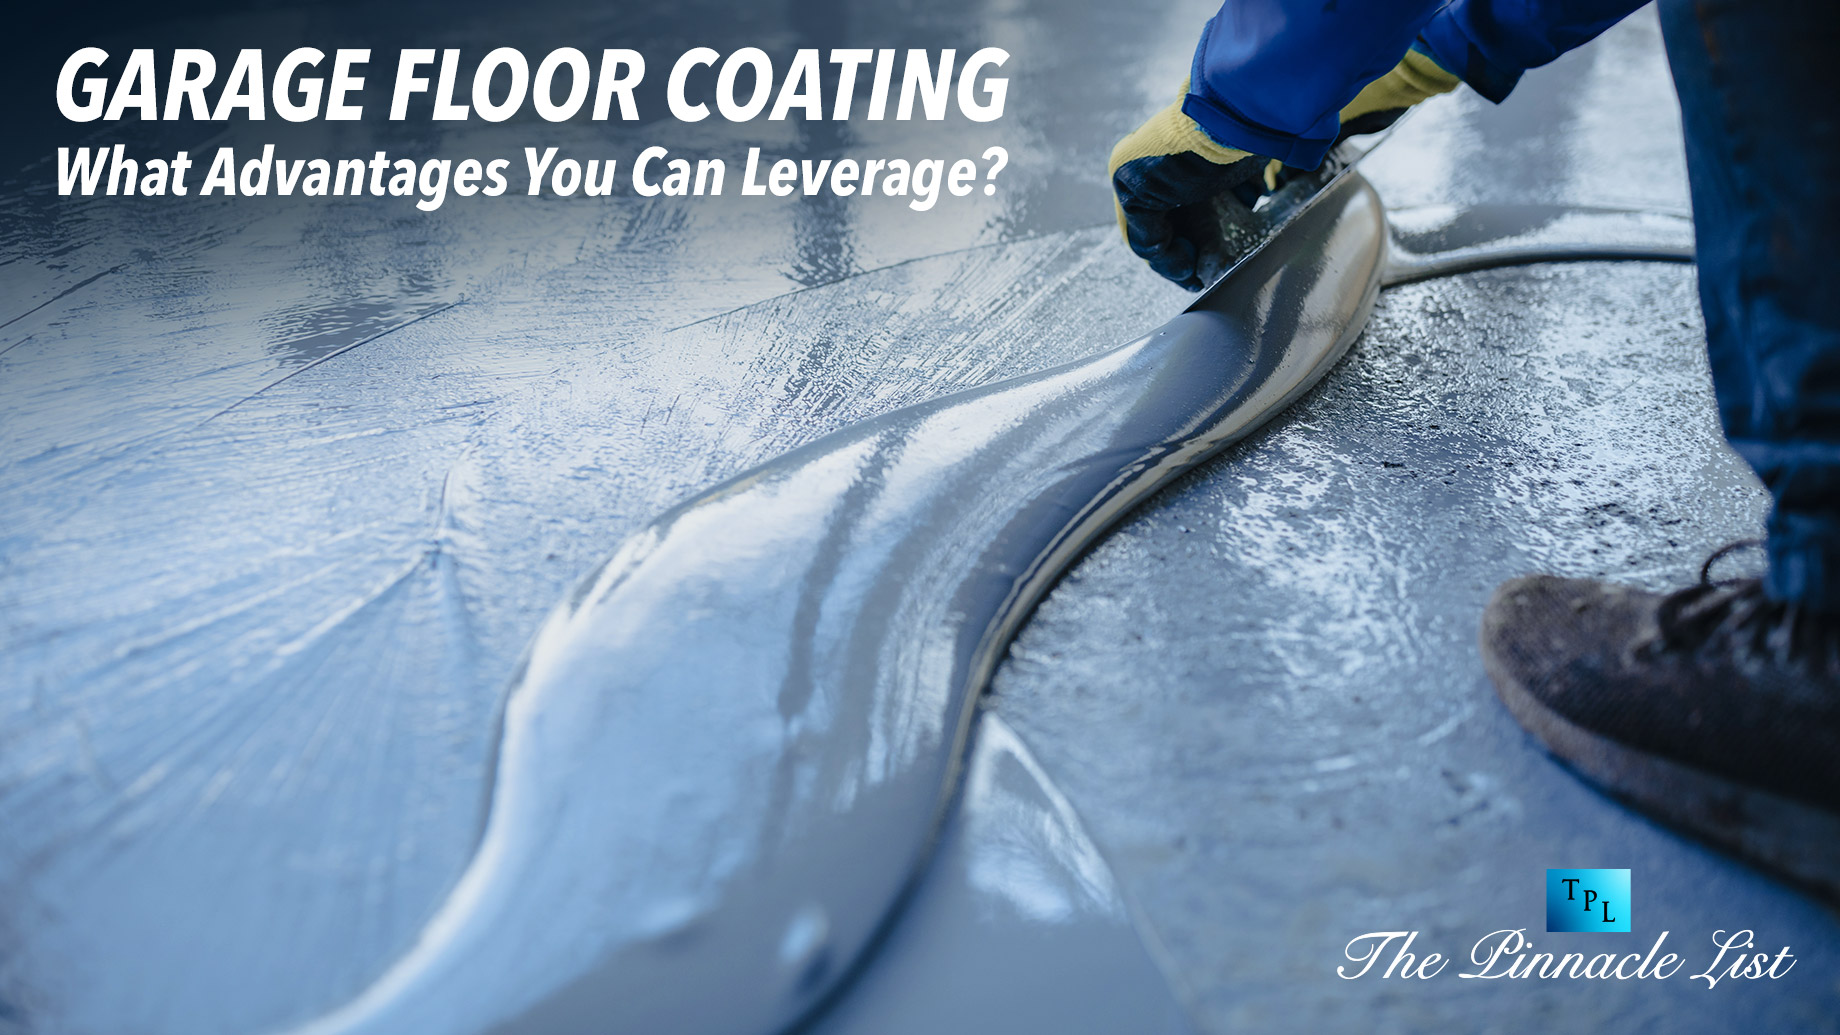 Garage Floor Coating: What Advantages You Can Leverage?